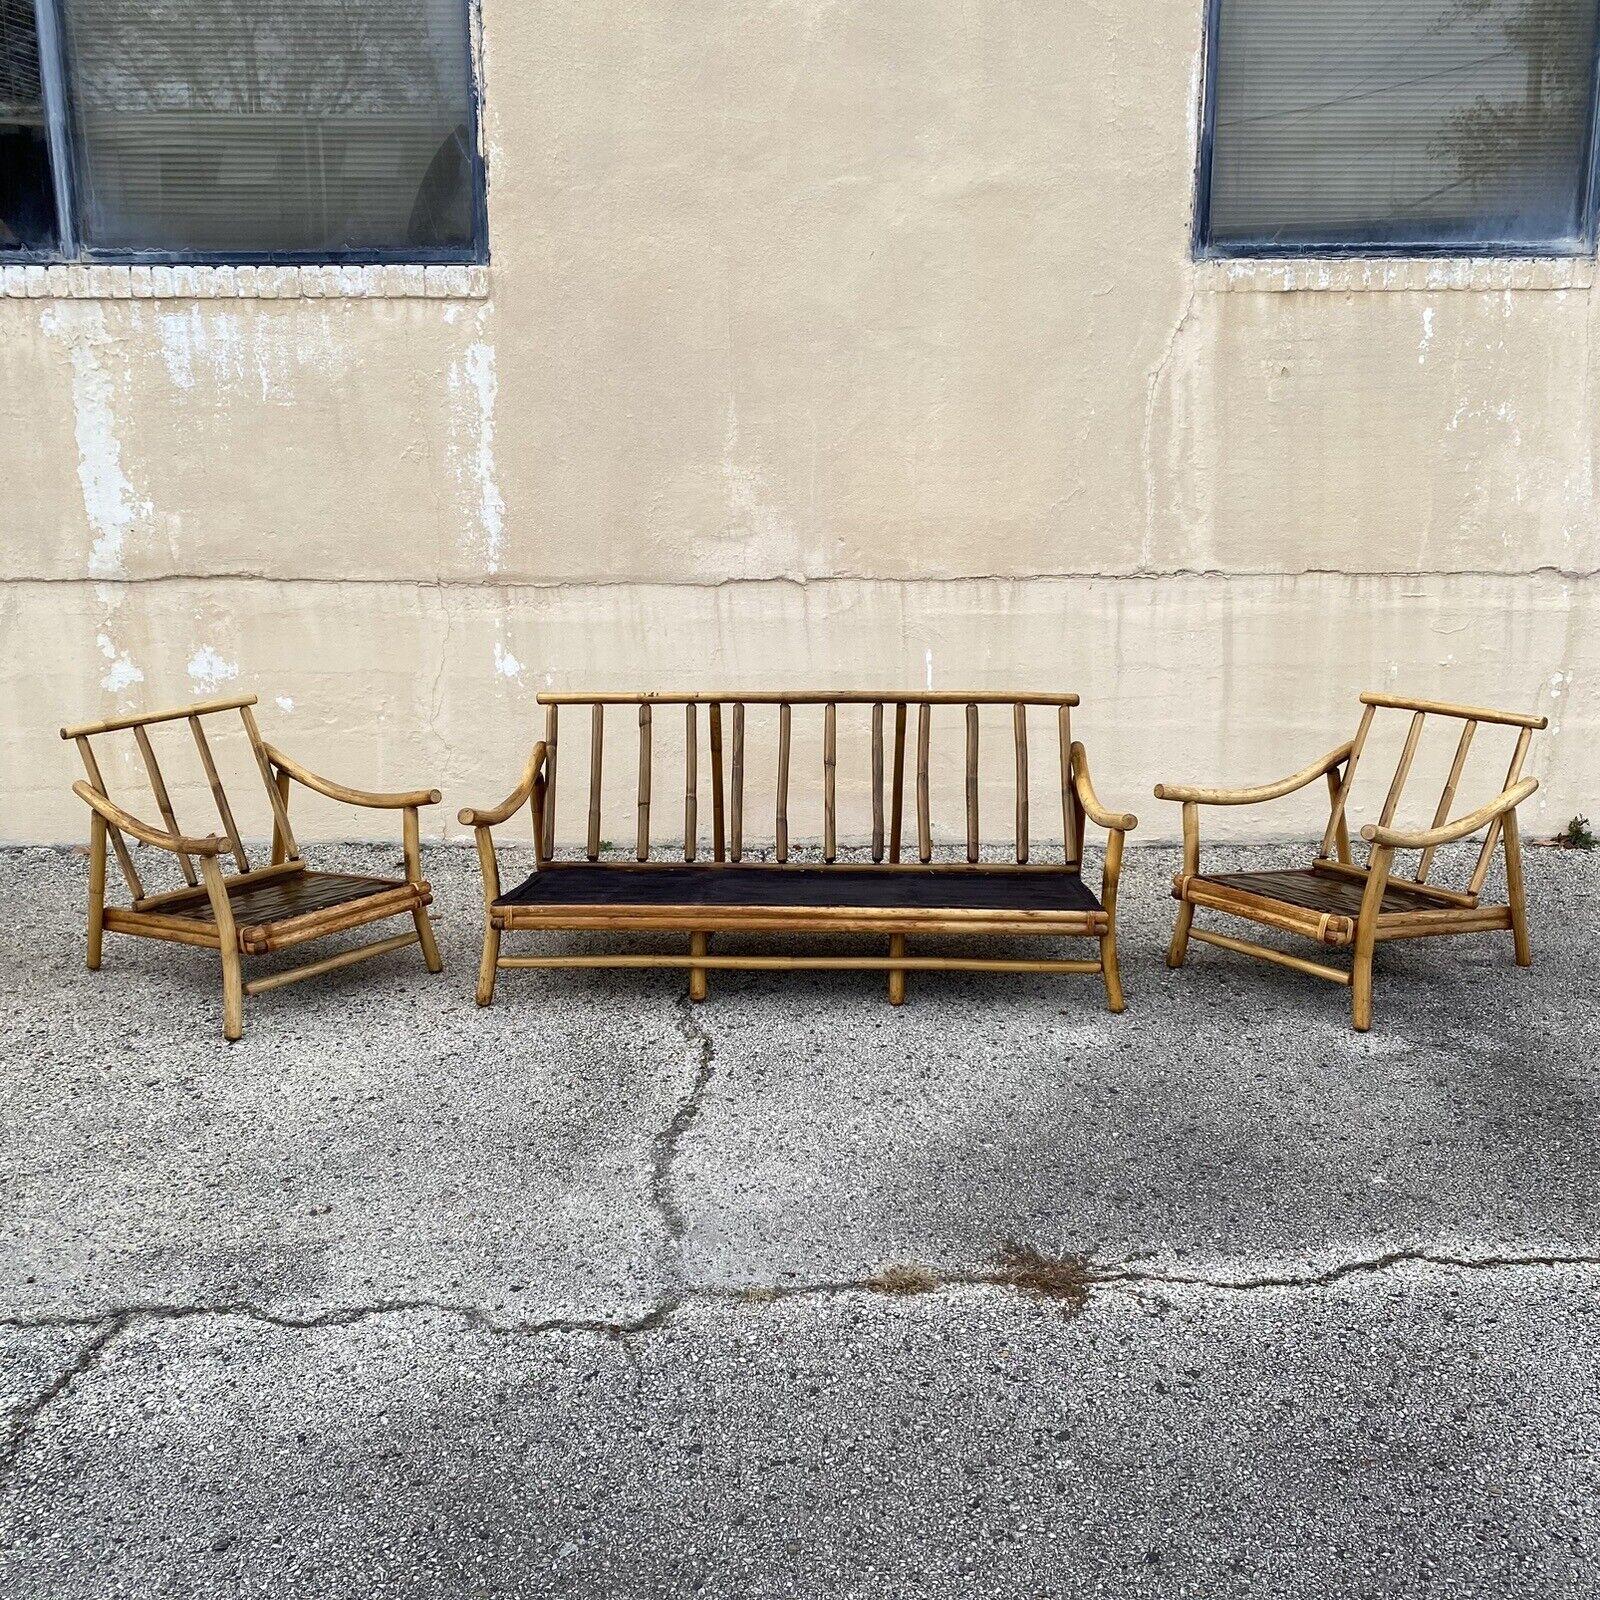 Vintage Ficks Reed Bamboo Rattan Tiki Sofa Set with Pair of Lounge Chairs, Unmarked - 3 Pc Set. Circa Mid 20th Century.
Measurements: 
Sofa: 27